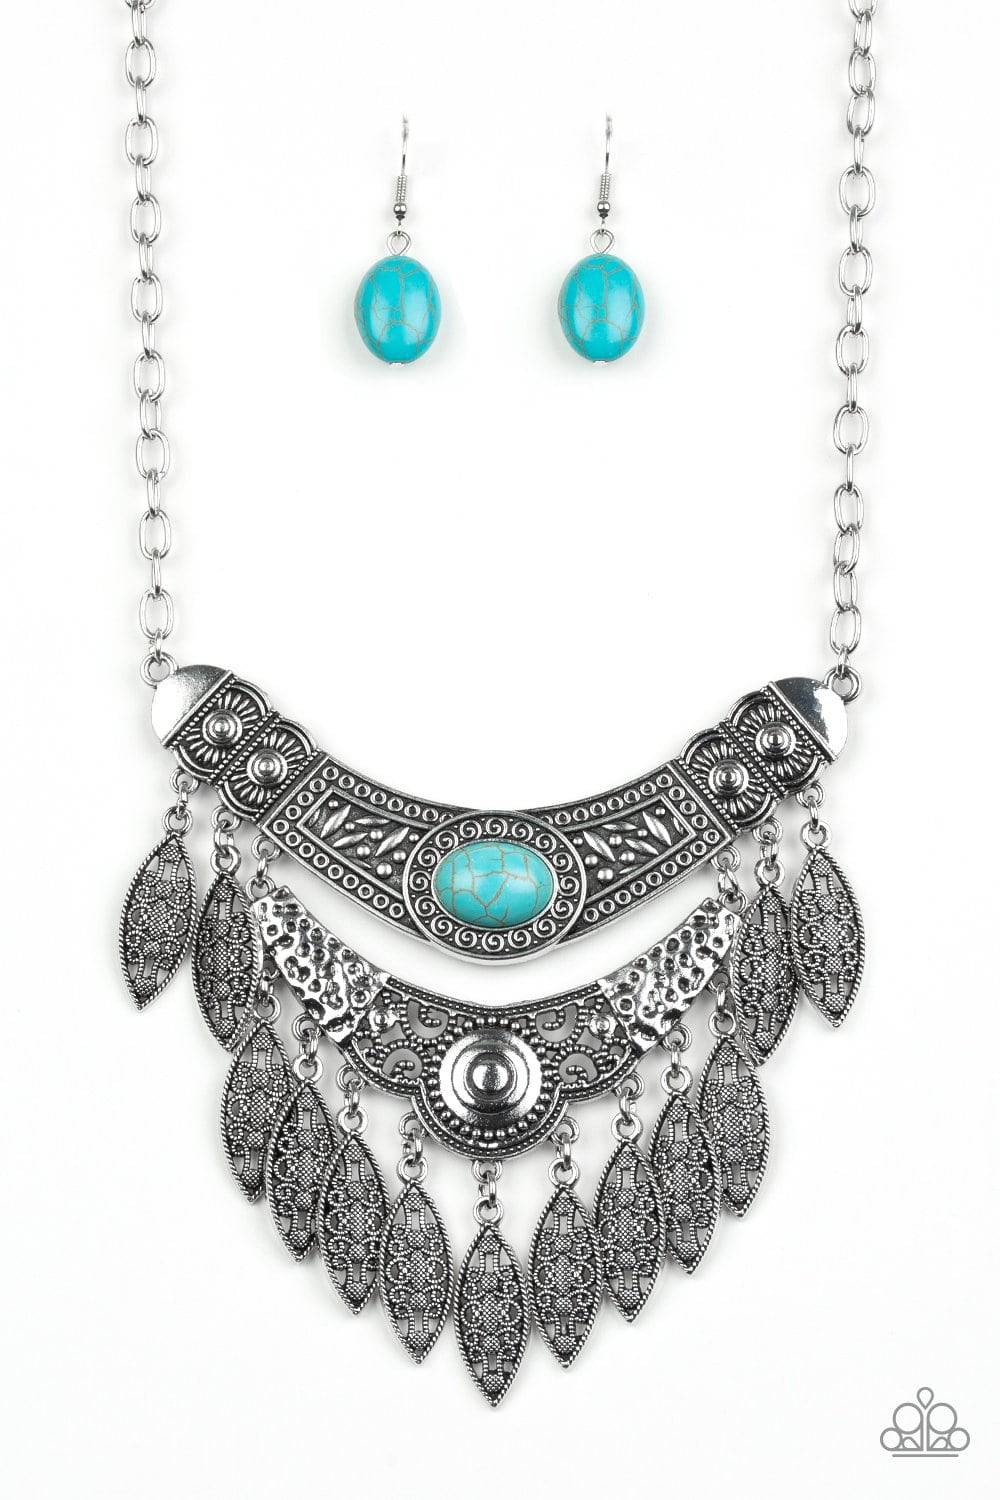 Island Queen - Blue Turquoise Necklace - Paparazzi Accessories - GlaMarous Titi Jewels